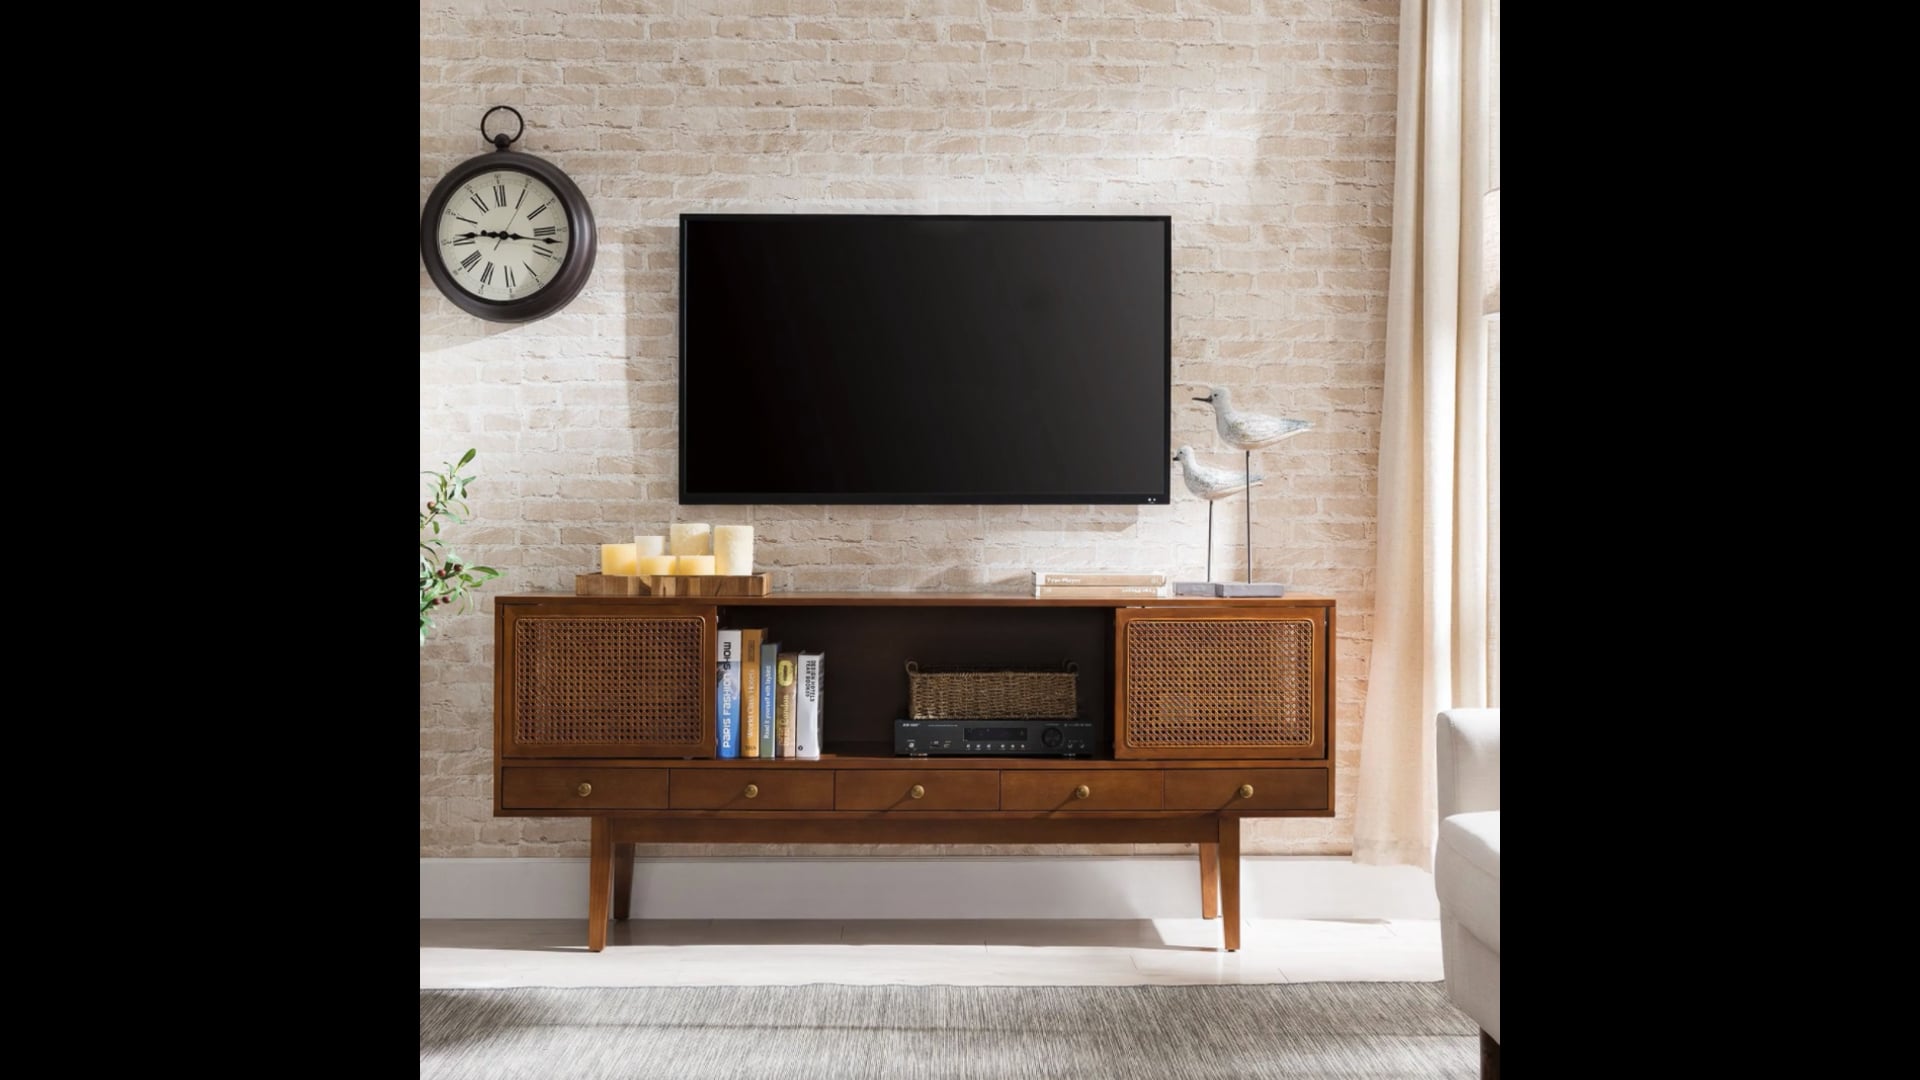 Holly & Martin Simms Midcentury Modern Media Console, Brown